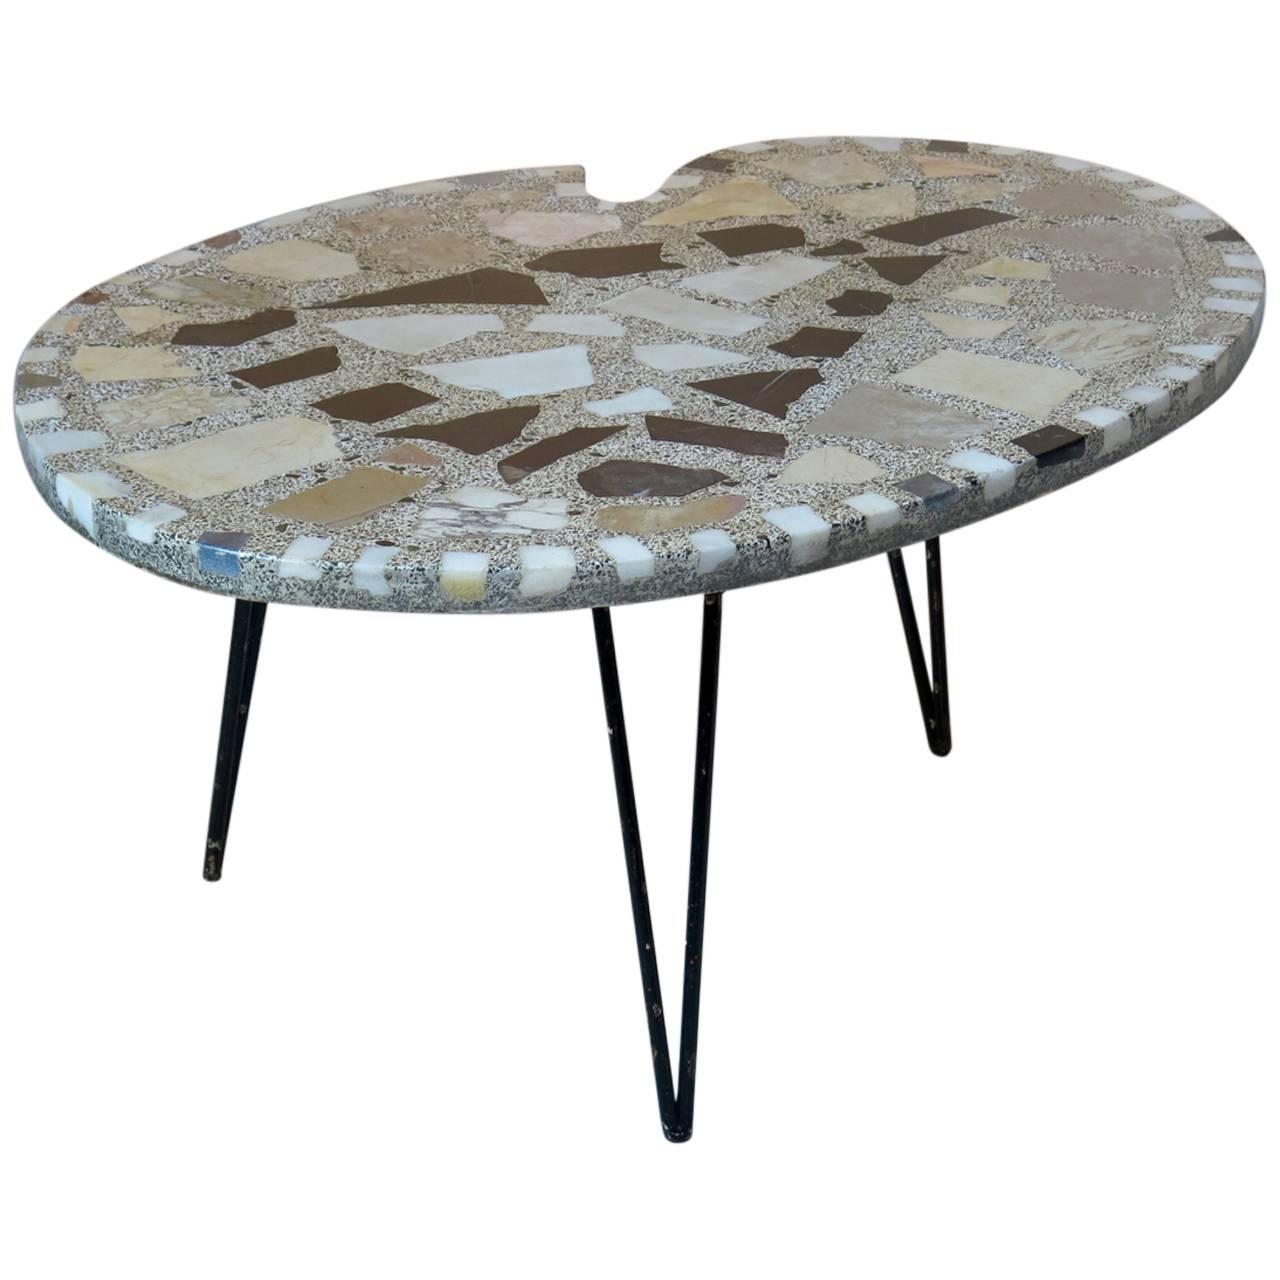 Palette-Shaped Coffee Table with Terrazzo Marble Top - France, 1950s